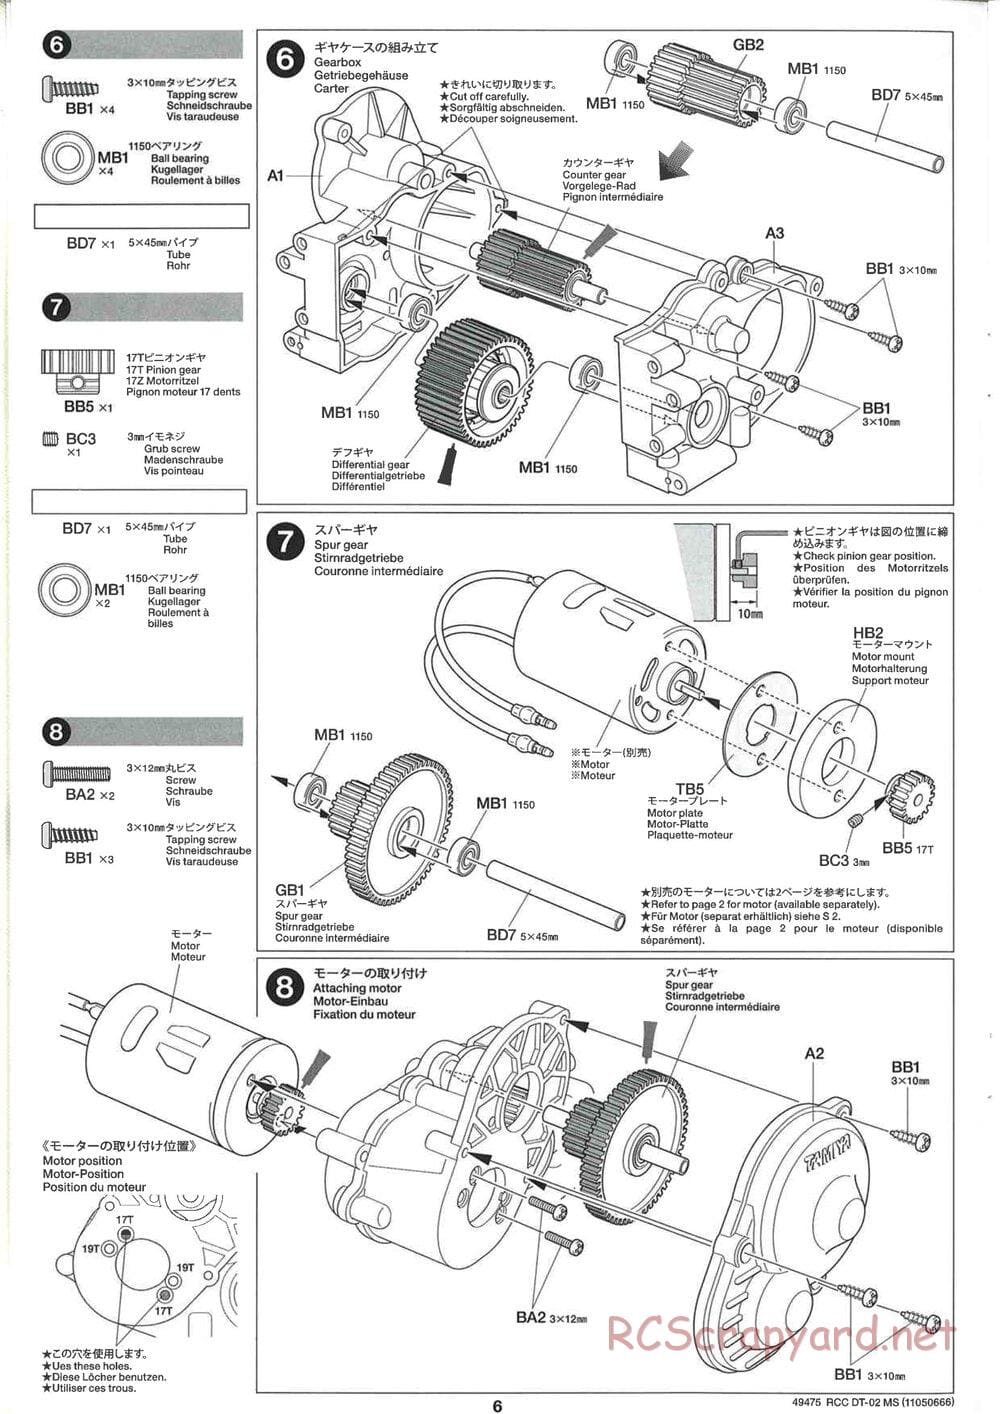 Tamiya - DT-02 MS Chassis - Manual - Page 7